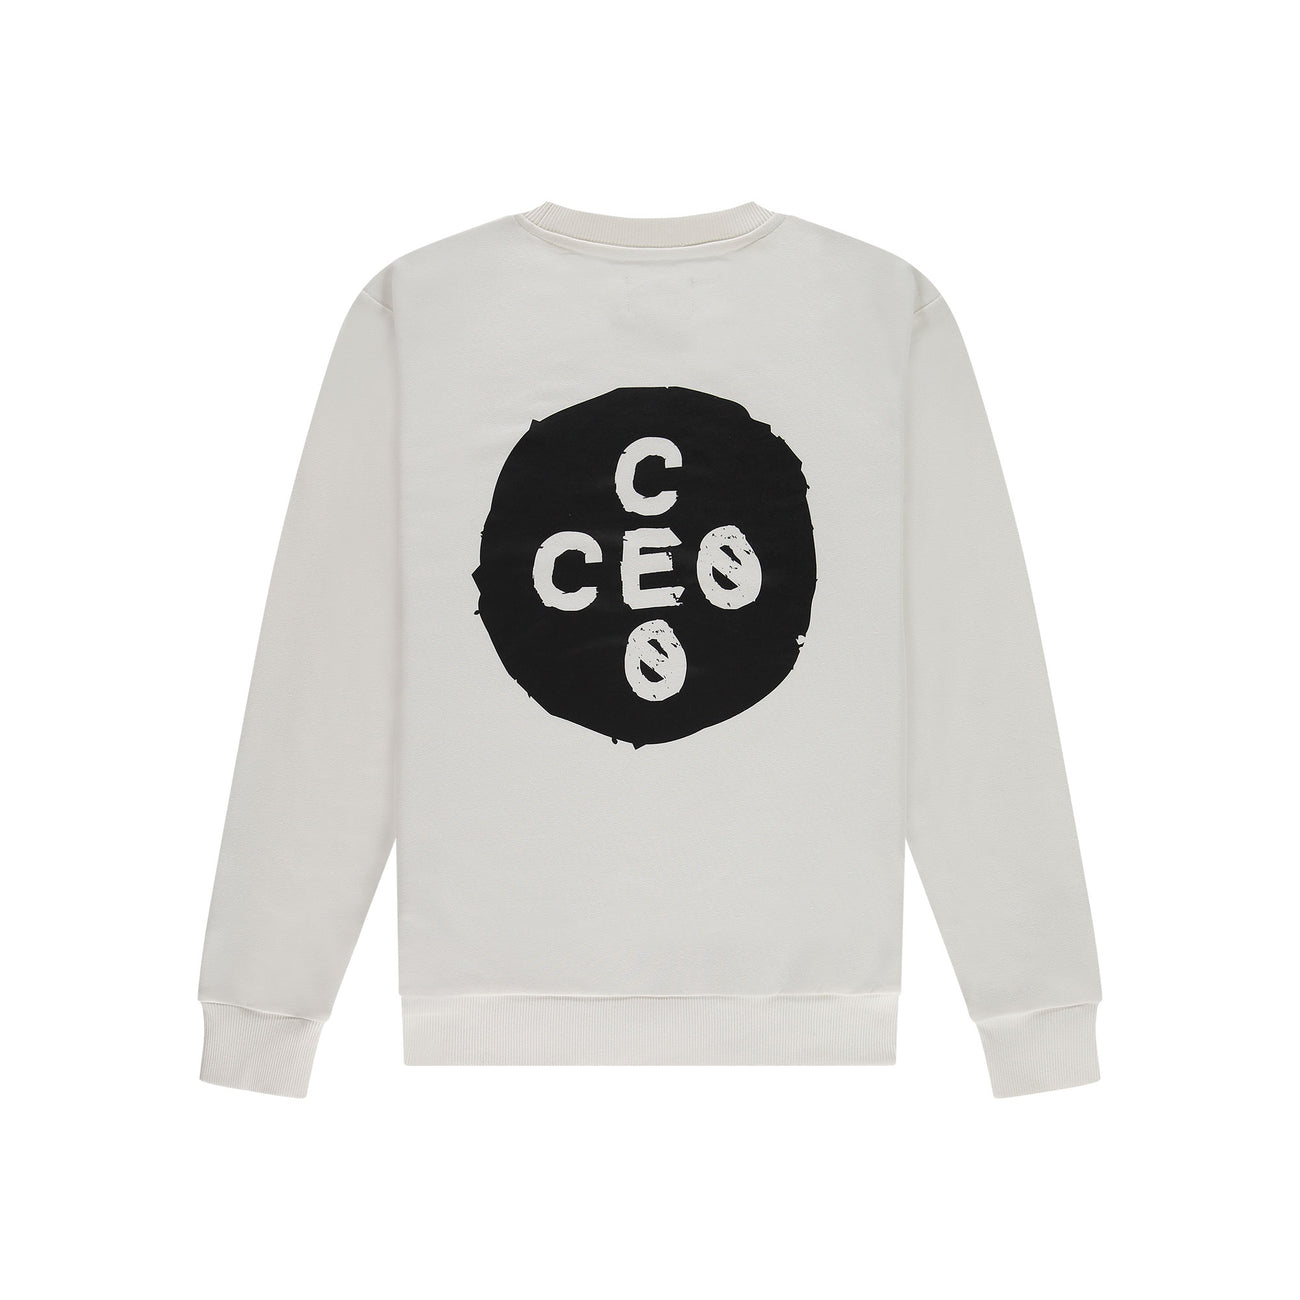 Chill Executive Officer Sweater White